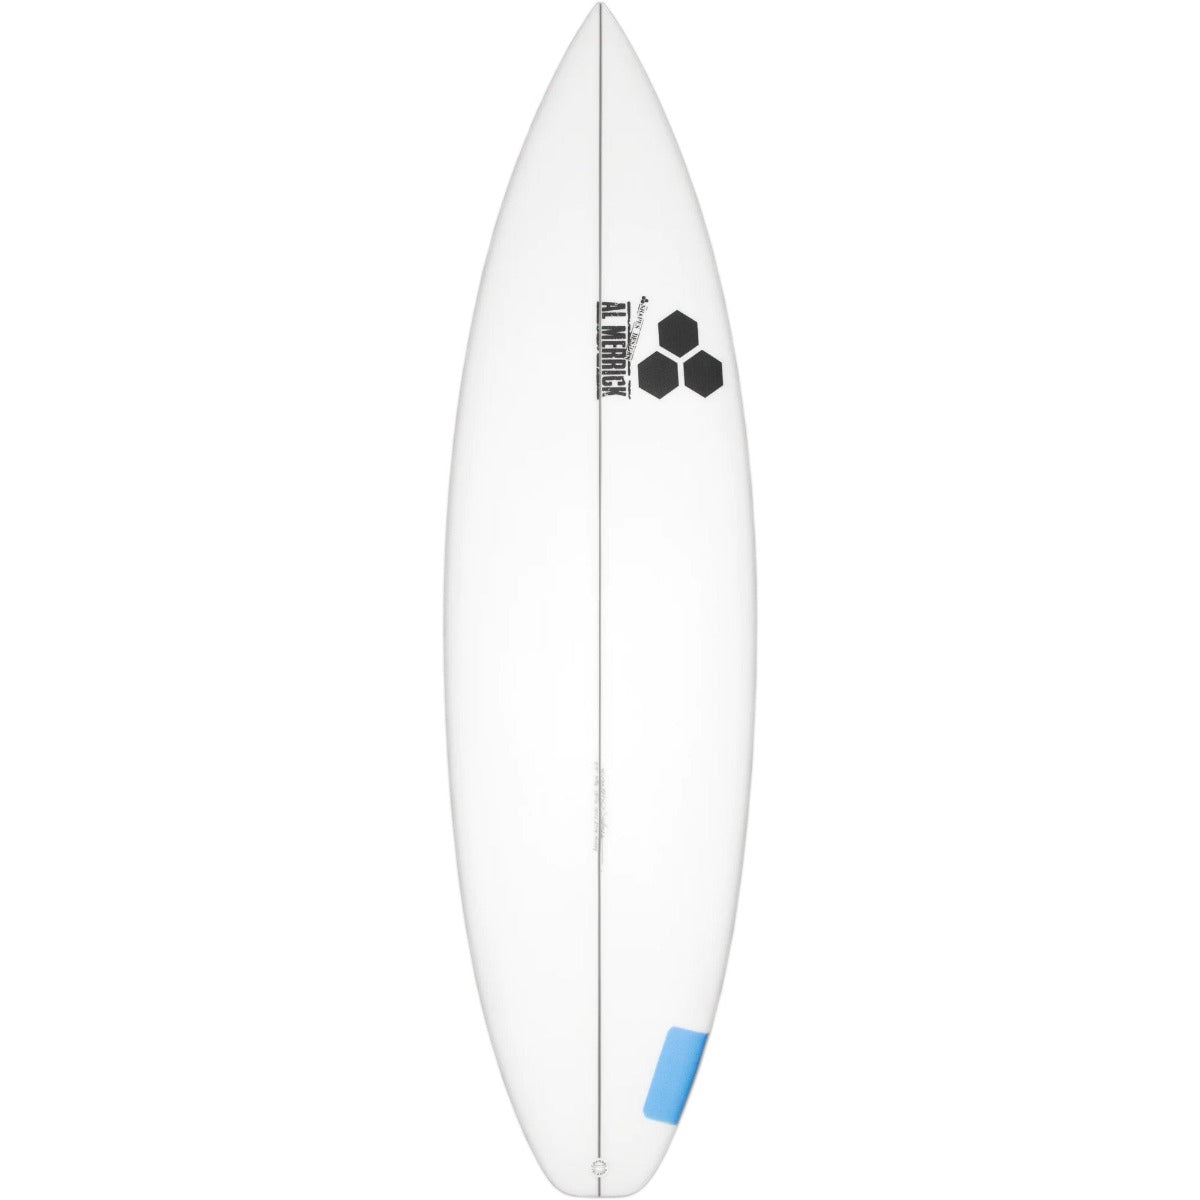 Lost Surfboards Driver 3.0 Squash Tail BRO Dims Preorder – Black 